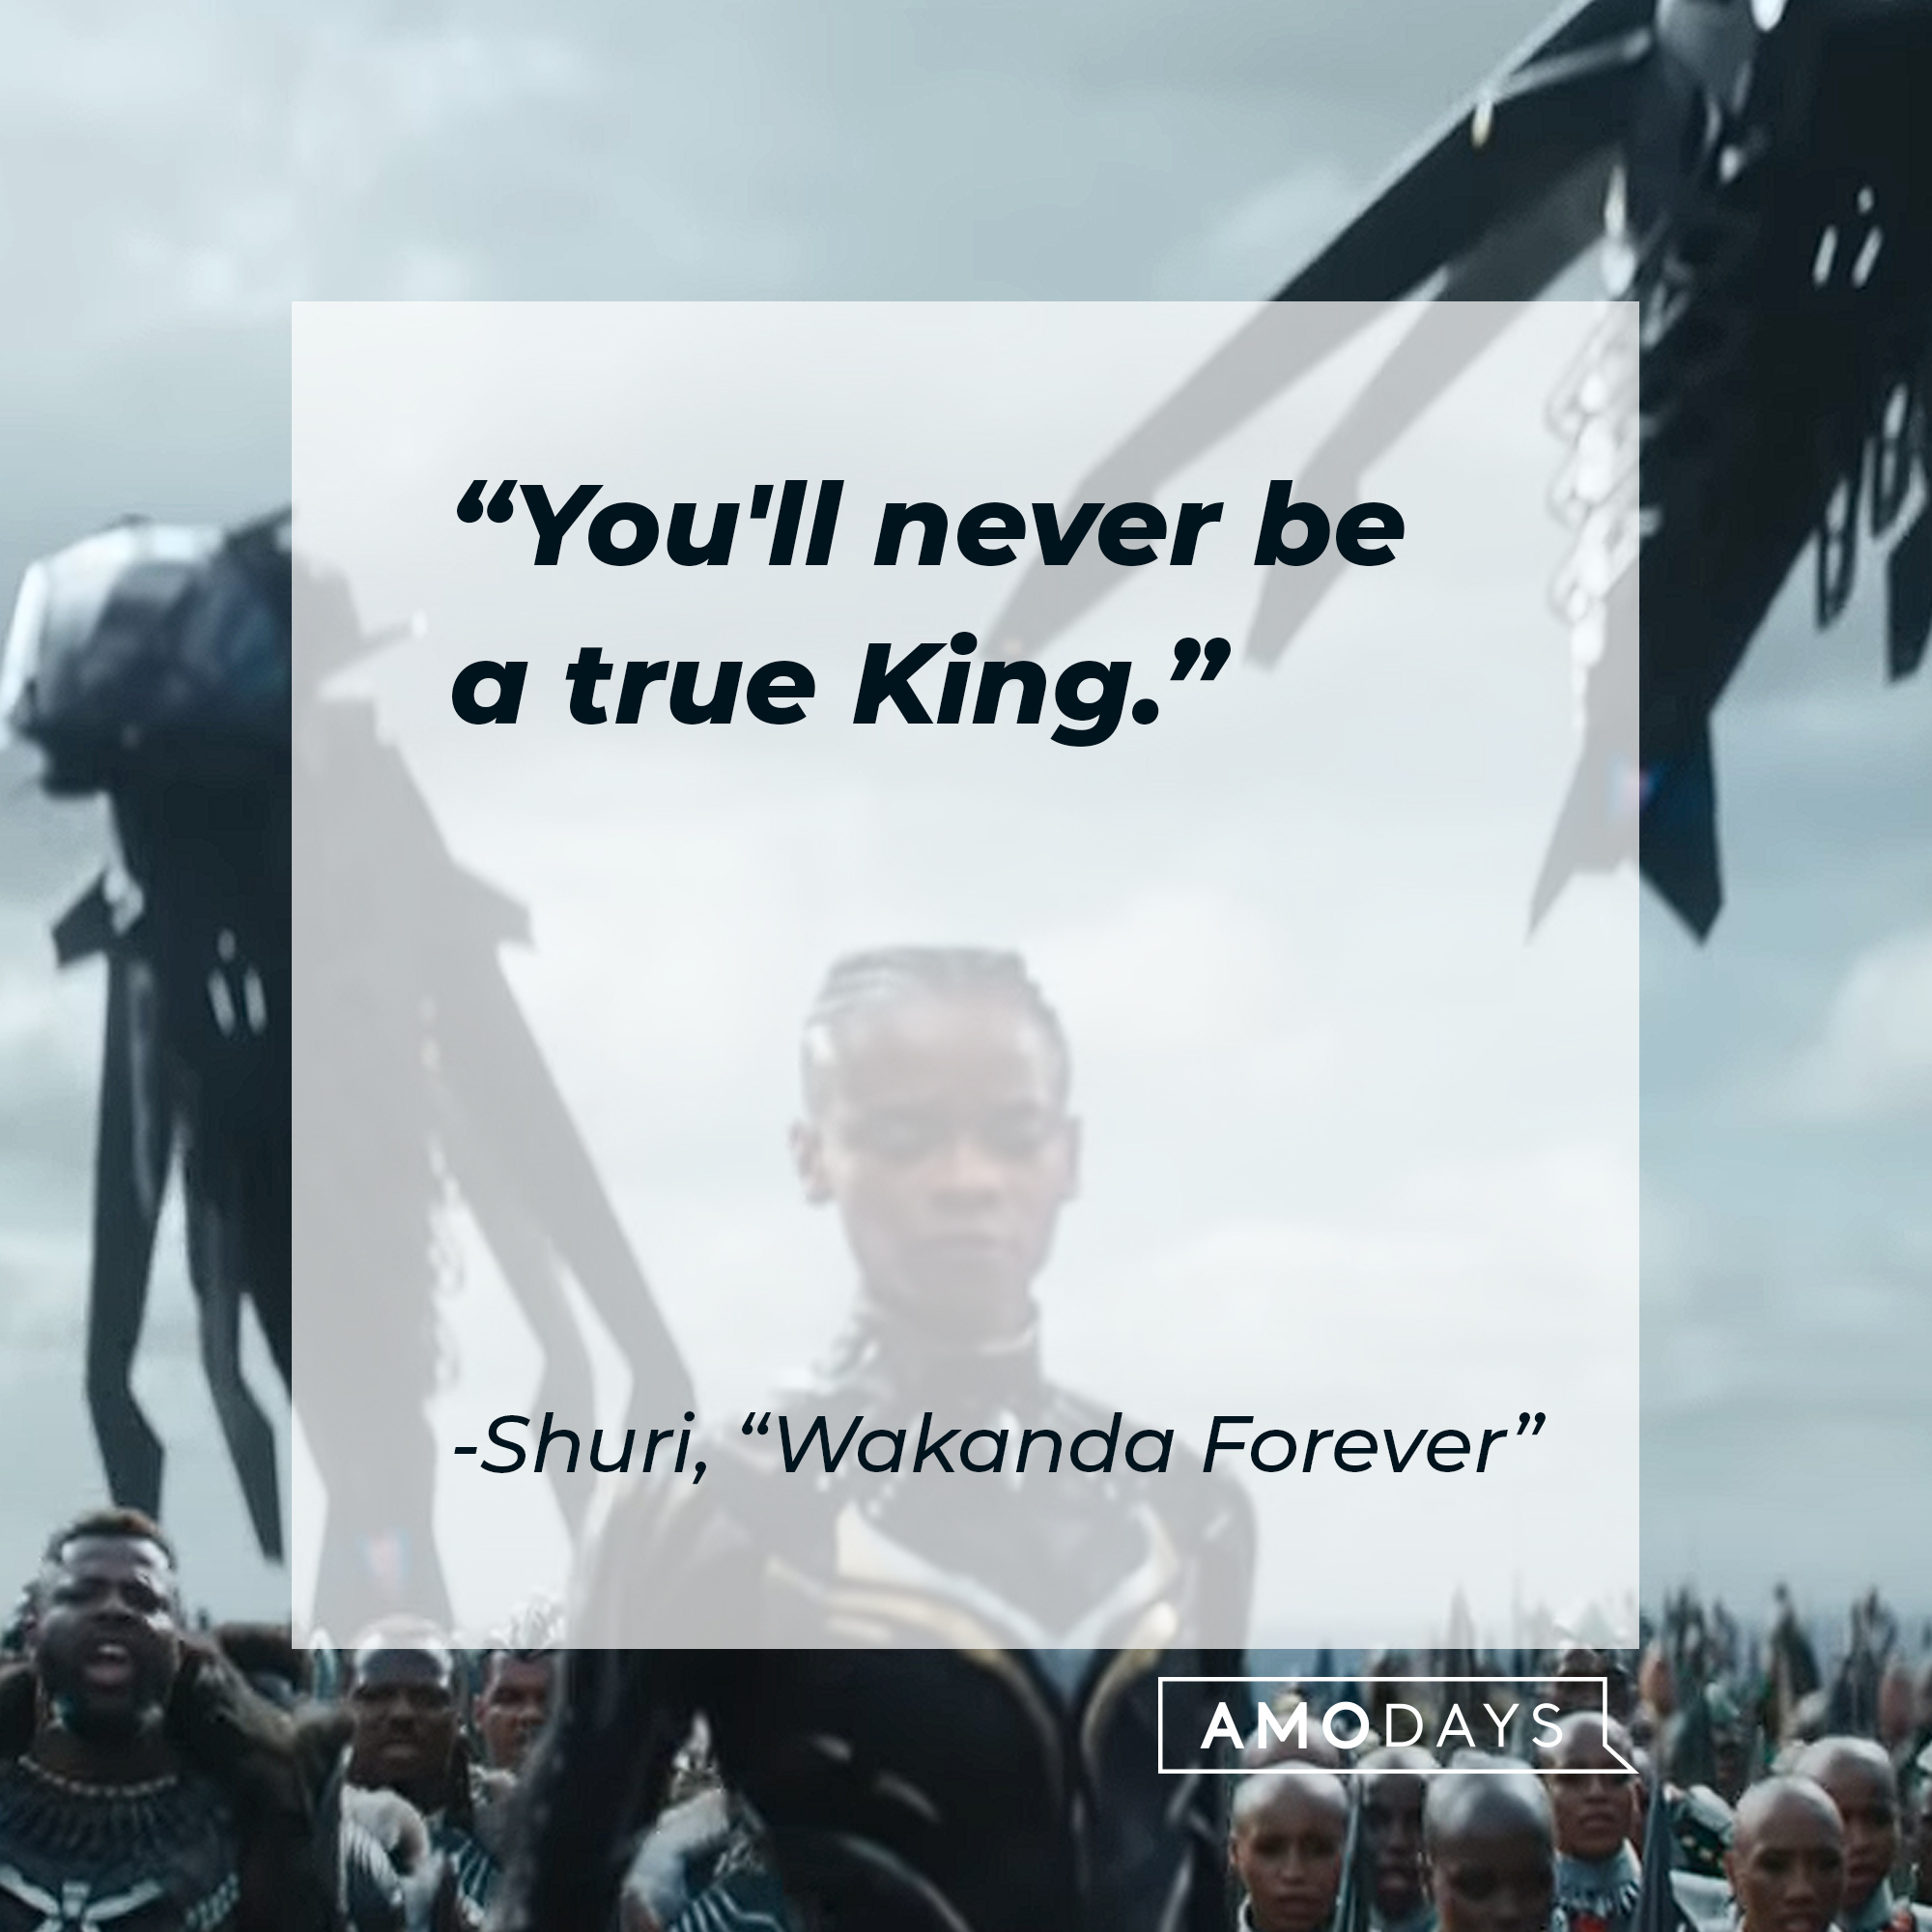 Shuri's quote from "Wakanda Forever:" “You'll never be a true King.” | Source: Youtube.com/marvel